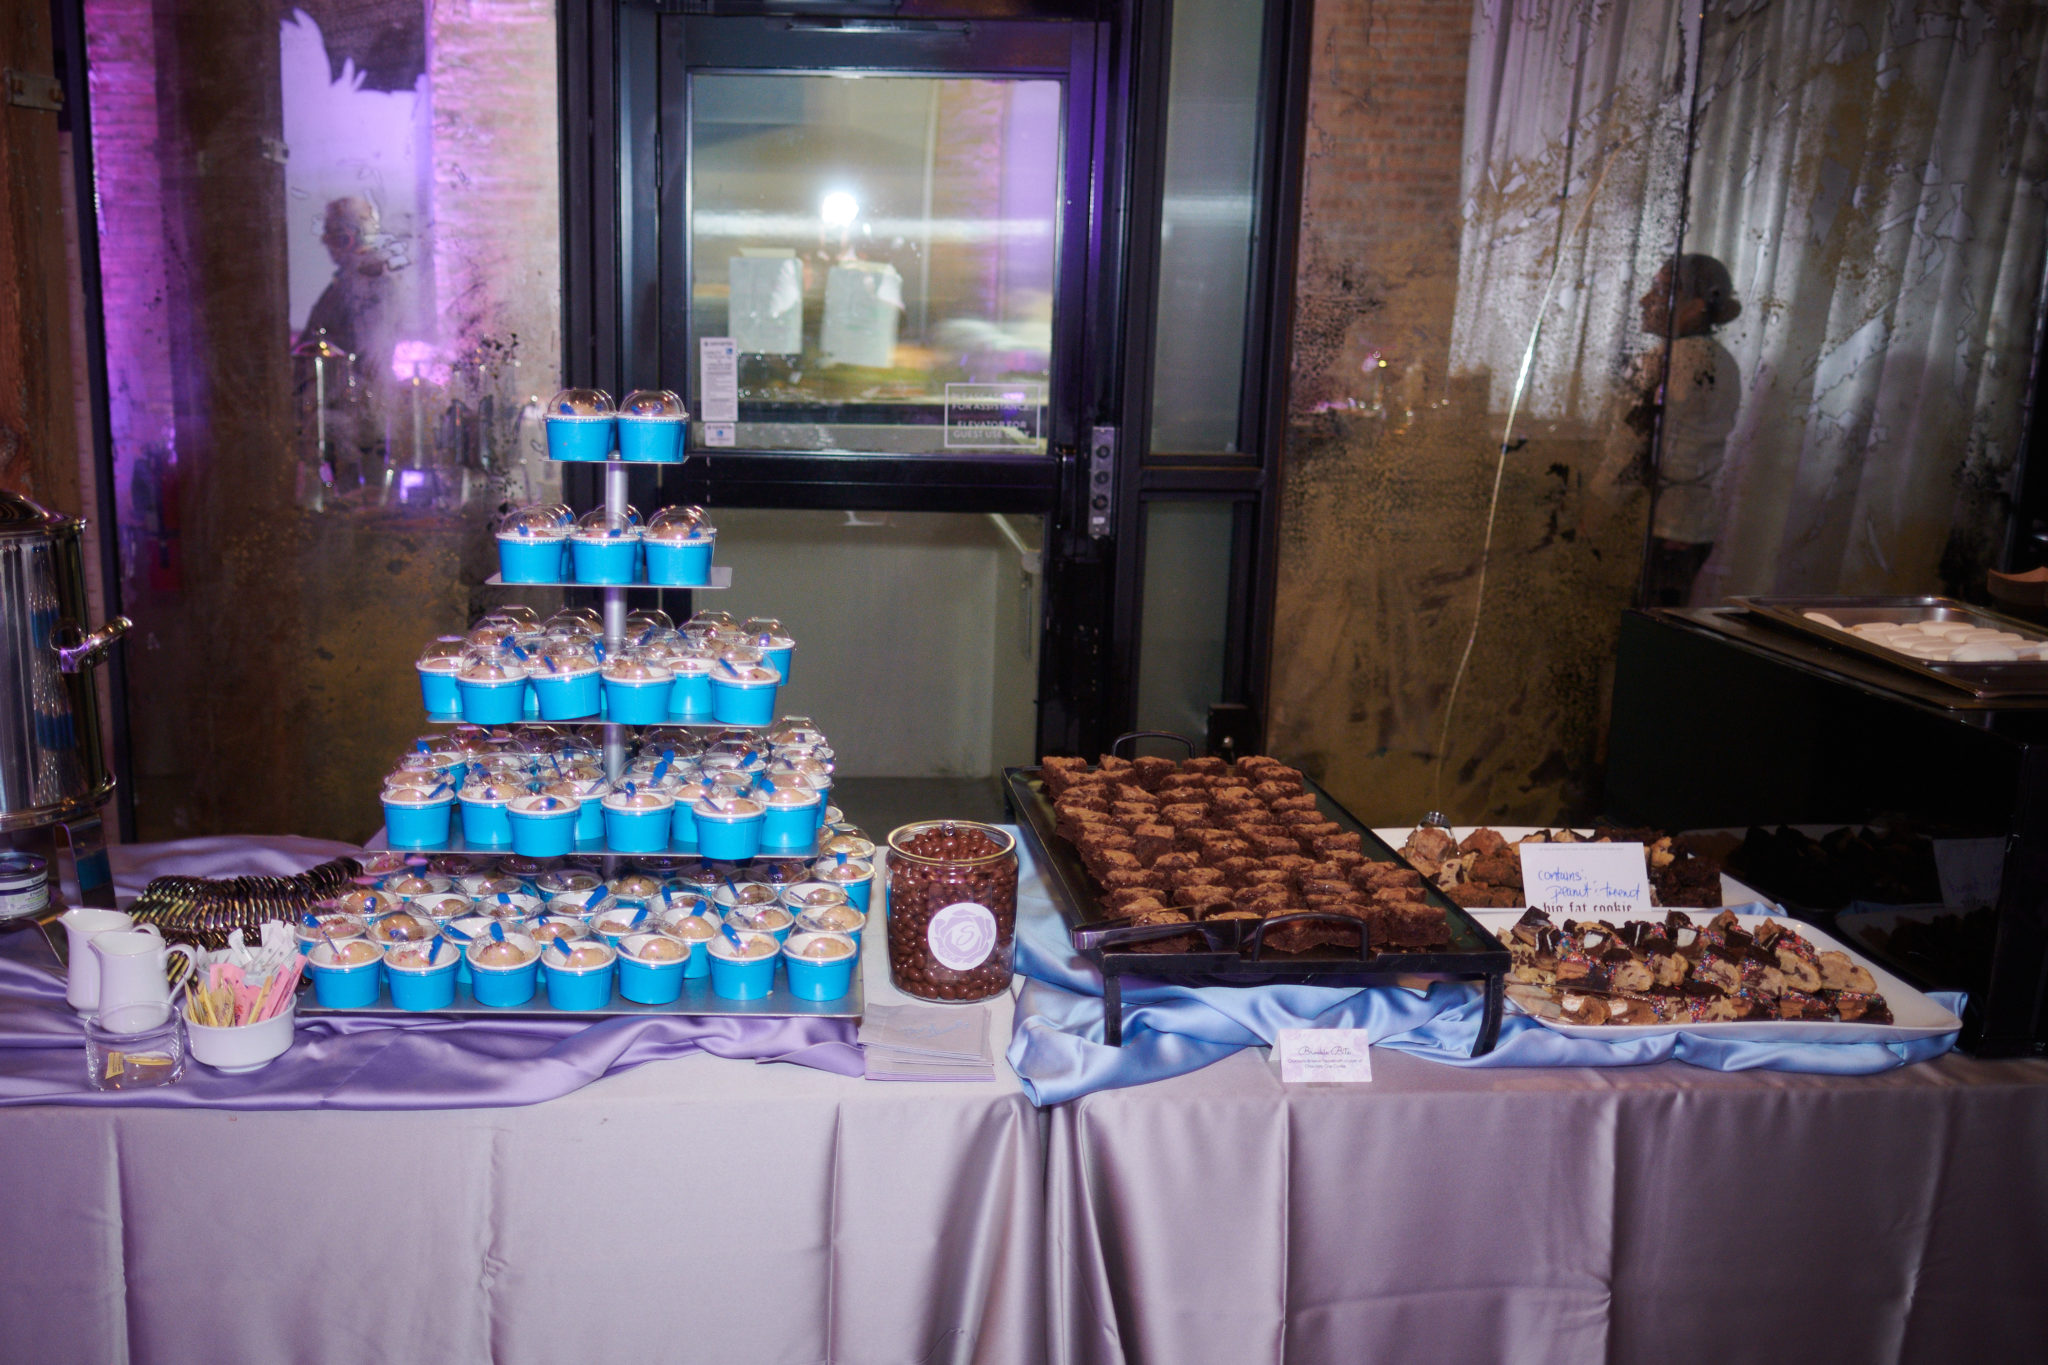 Sienna’s Bat Mitzvah at Anshe Emet and Architectural Events